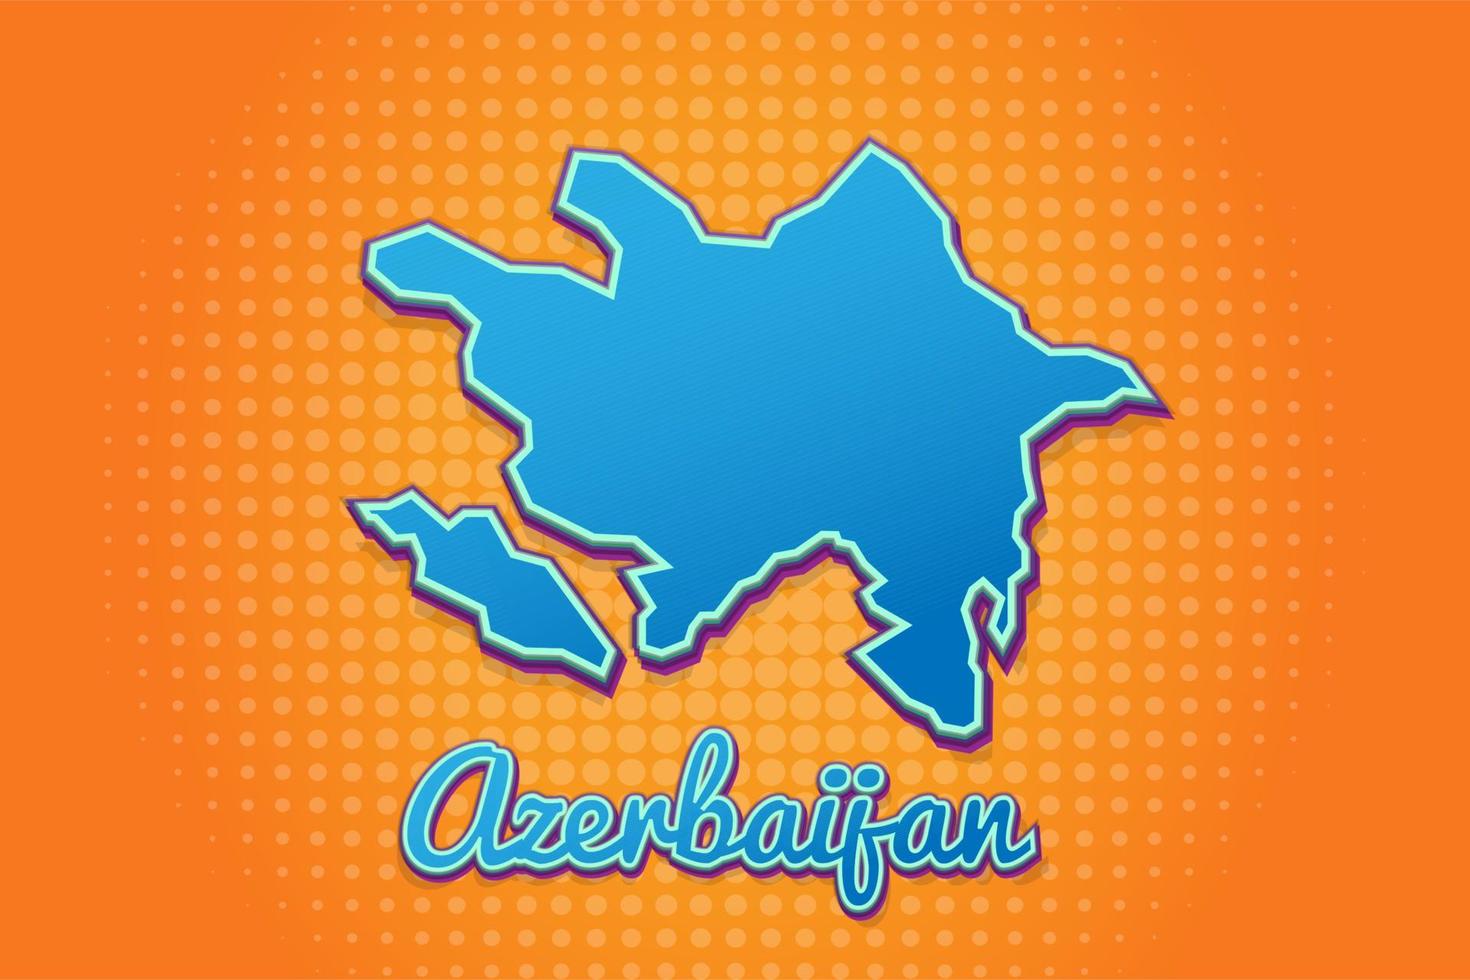 Retro map of azerbaijan with halftone background. Cartoon map icon in comic book and pop art style. Cartography business concept. Great for kids design,educational game,magnet or poster design. vector